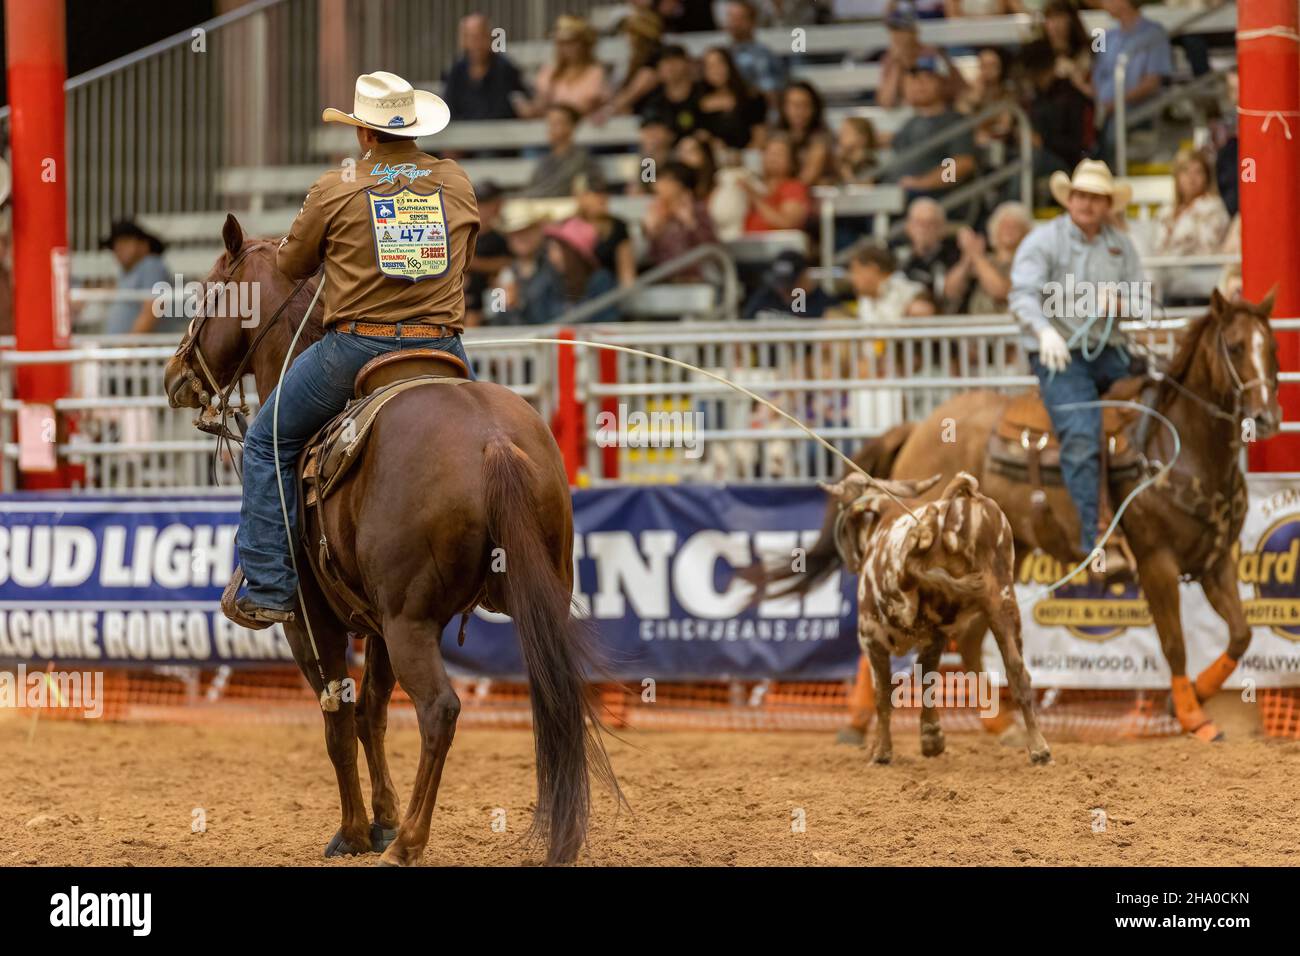 Team Roping seen on Southeastern Circuit Finals Rodeo during the event. Stock Photo